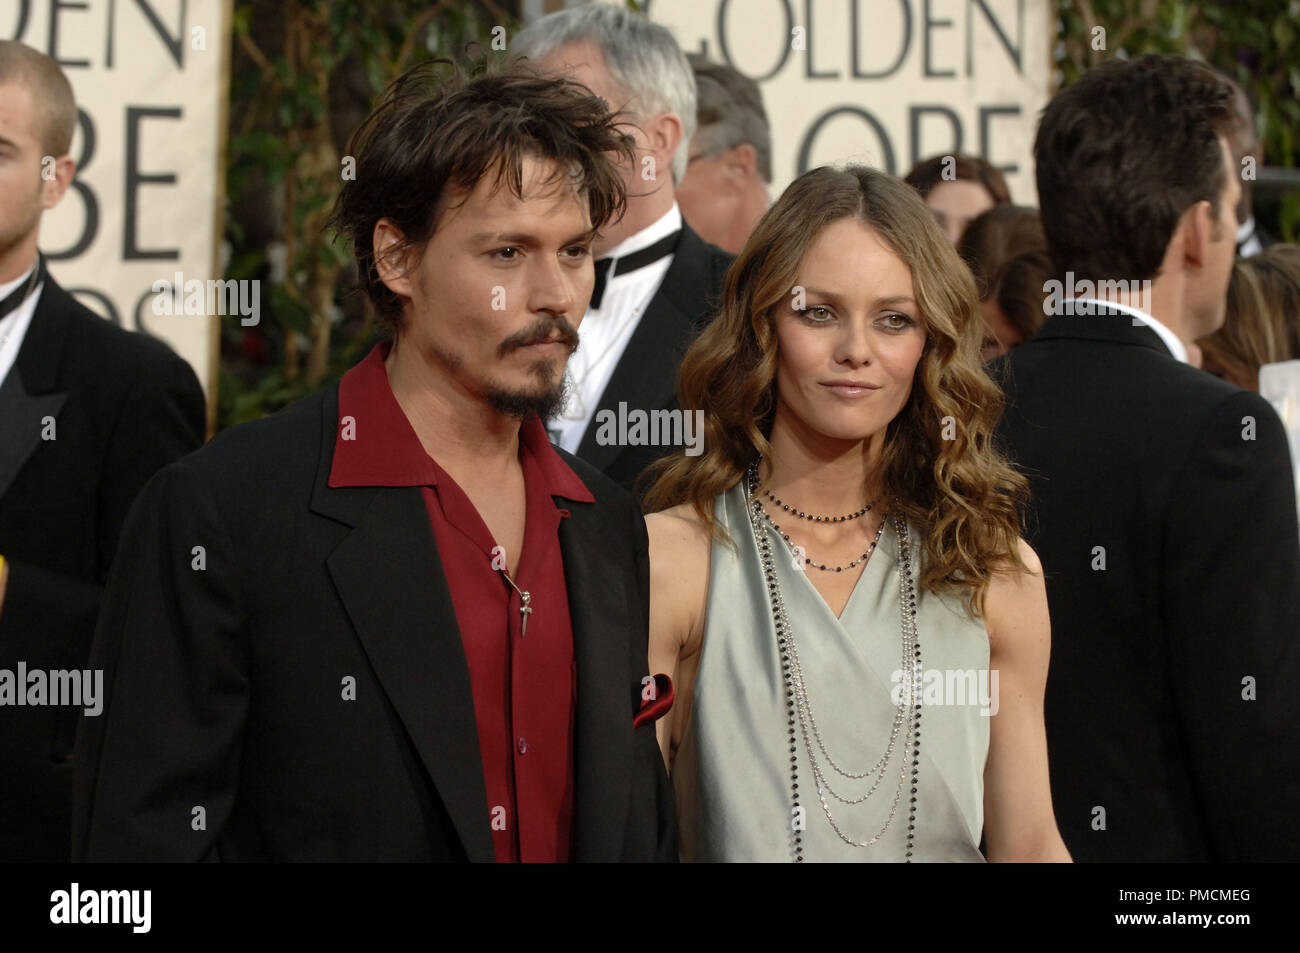 Arrivals at 'The 63rd Annual Golden Globe Awards' Johnny Depp, Vanessa Paradis 01-16-2006  File Reference # 1081 012PLX  For Editorial Use Only - Stock Photo